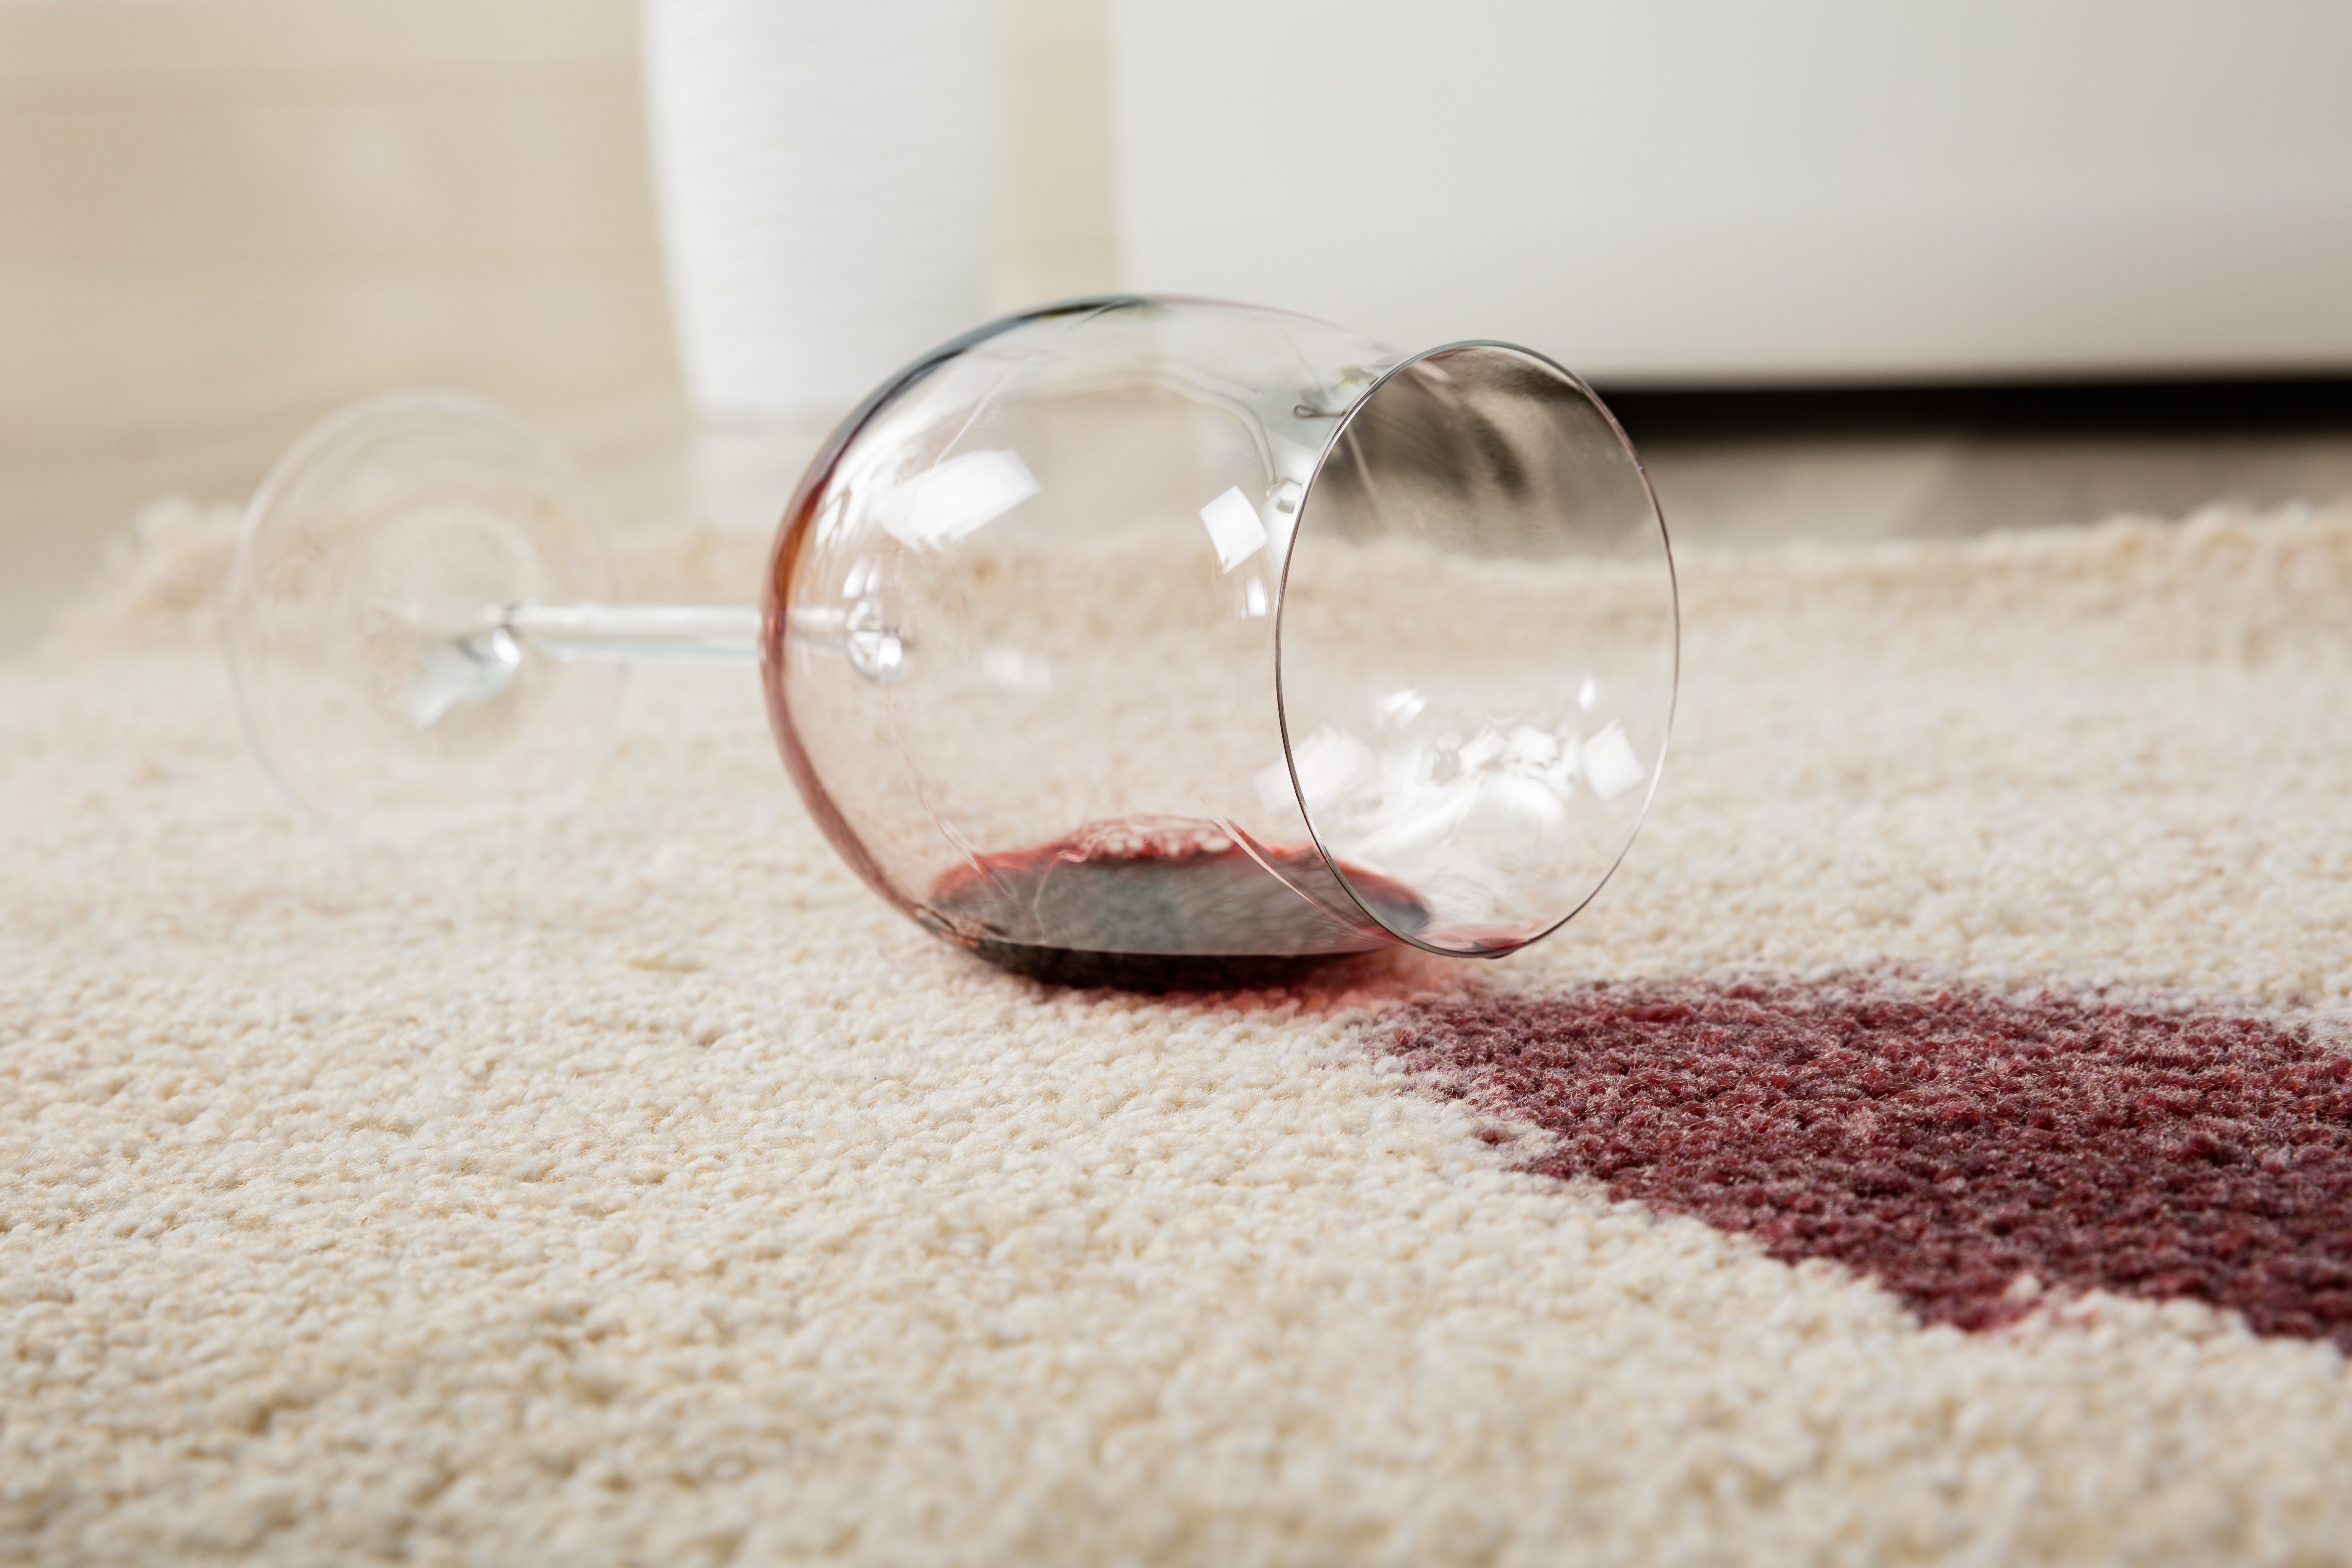 Red wine spilling on a light colored carpet to illustrate methods to clean stains